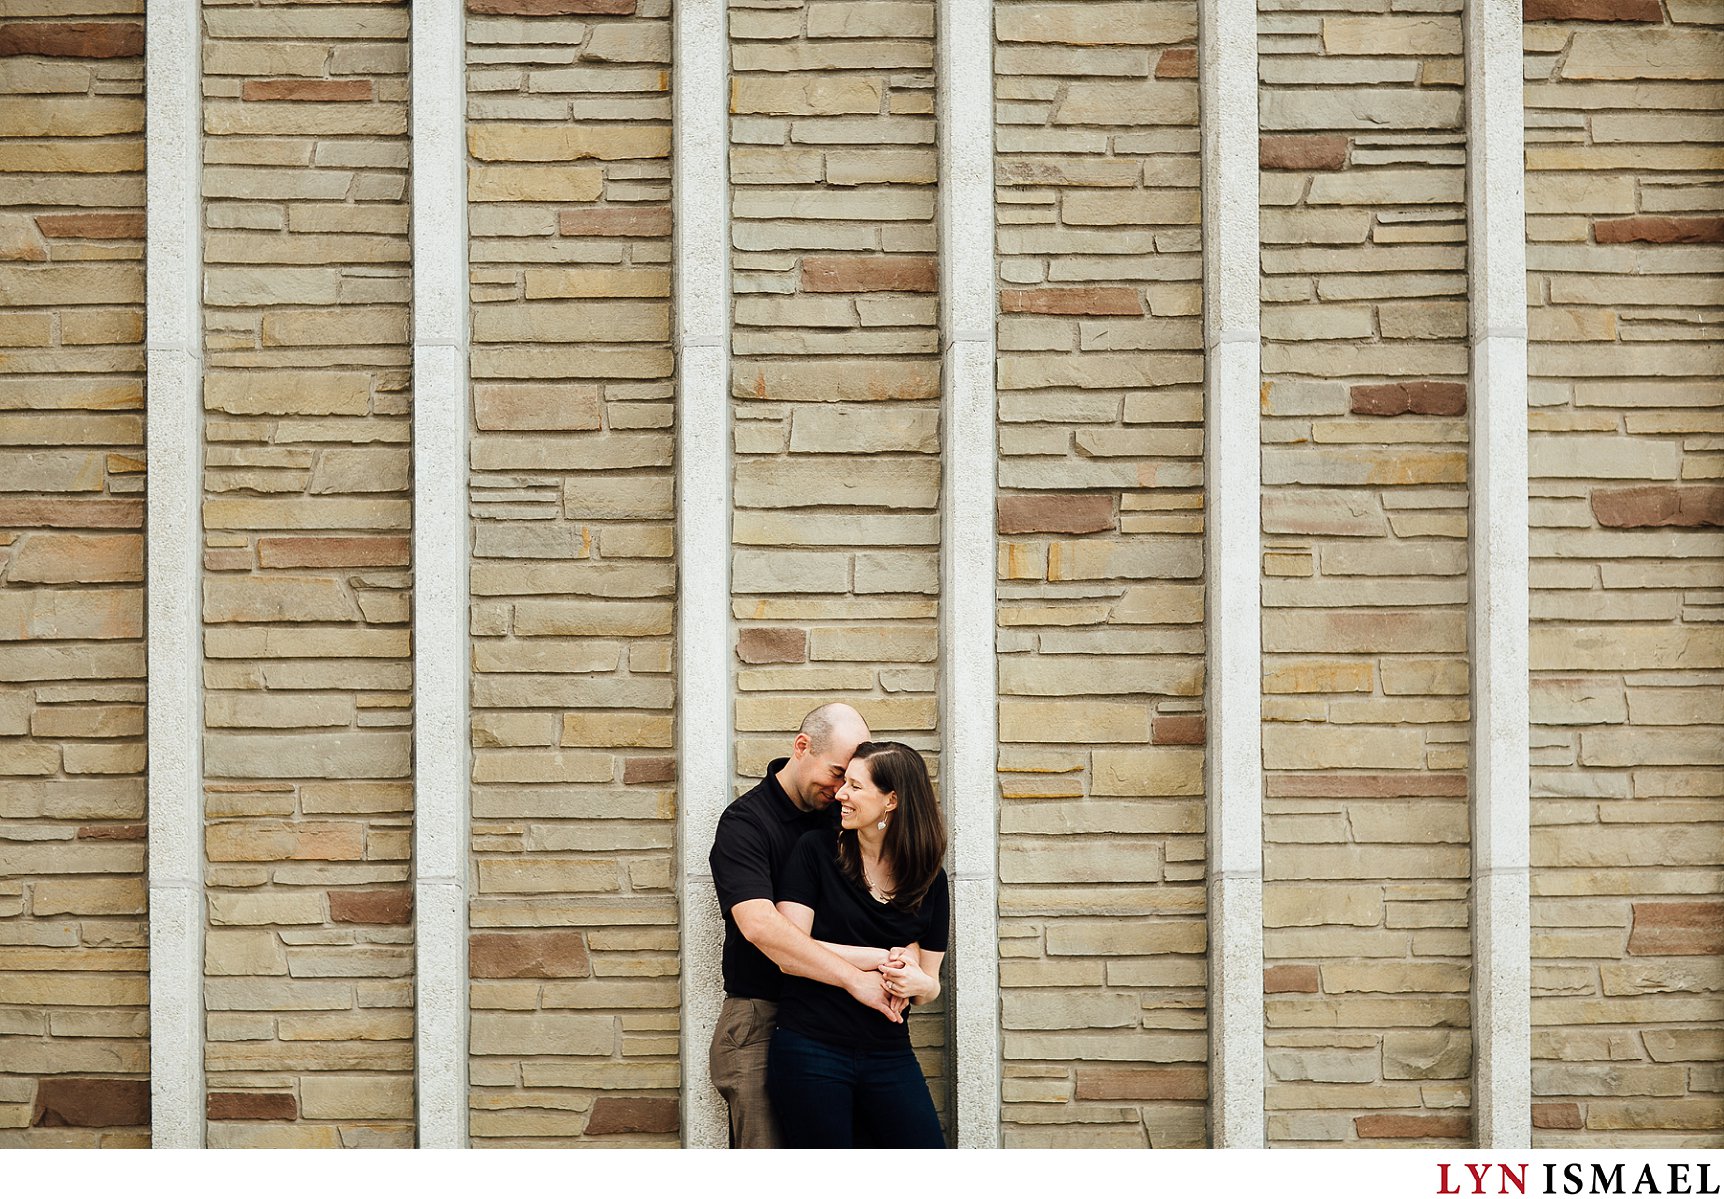 Graphic lines framing a couple at their engagement session.